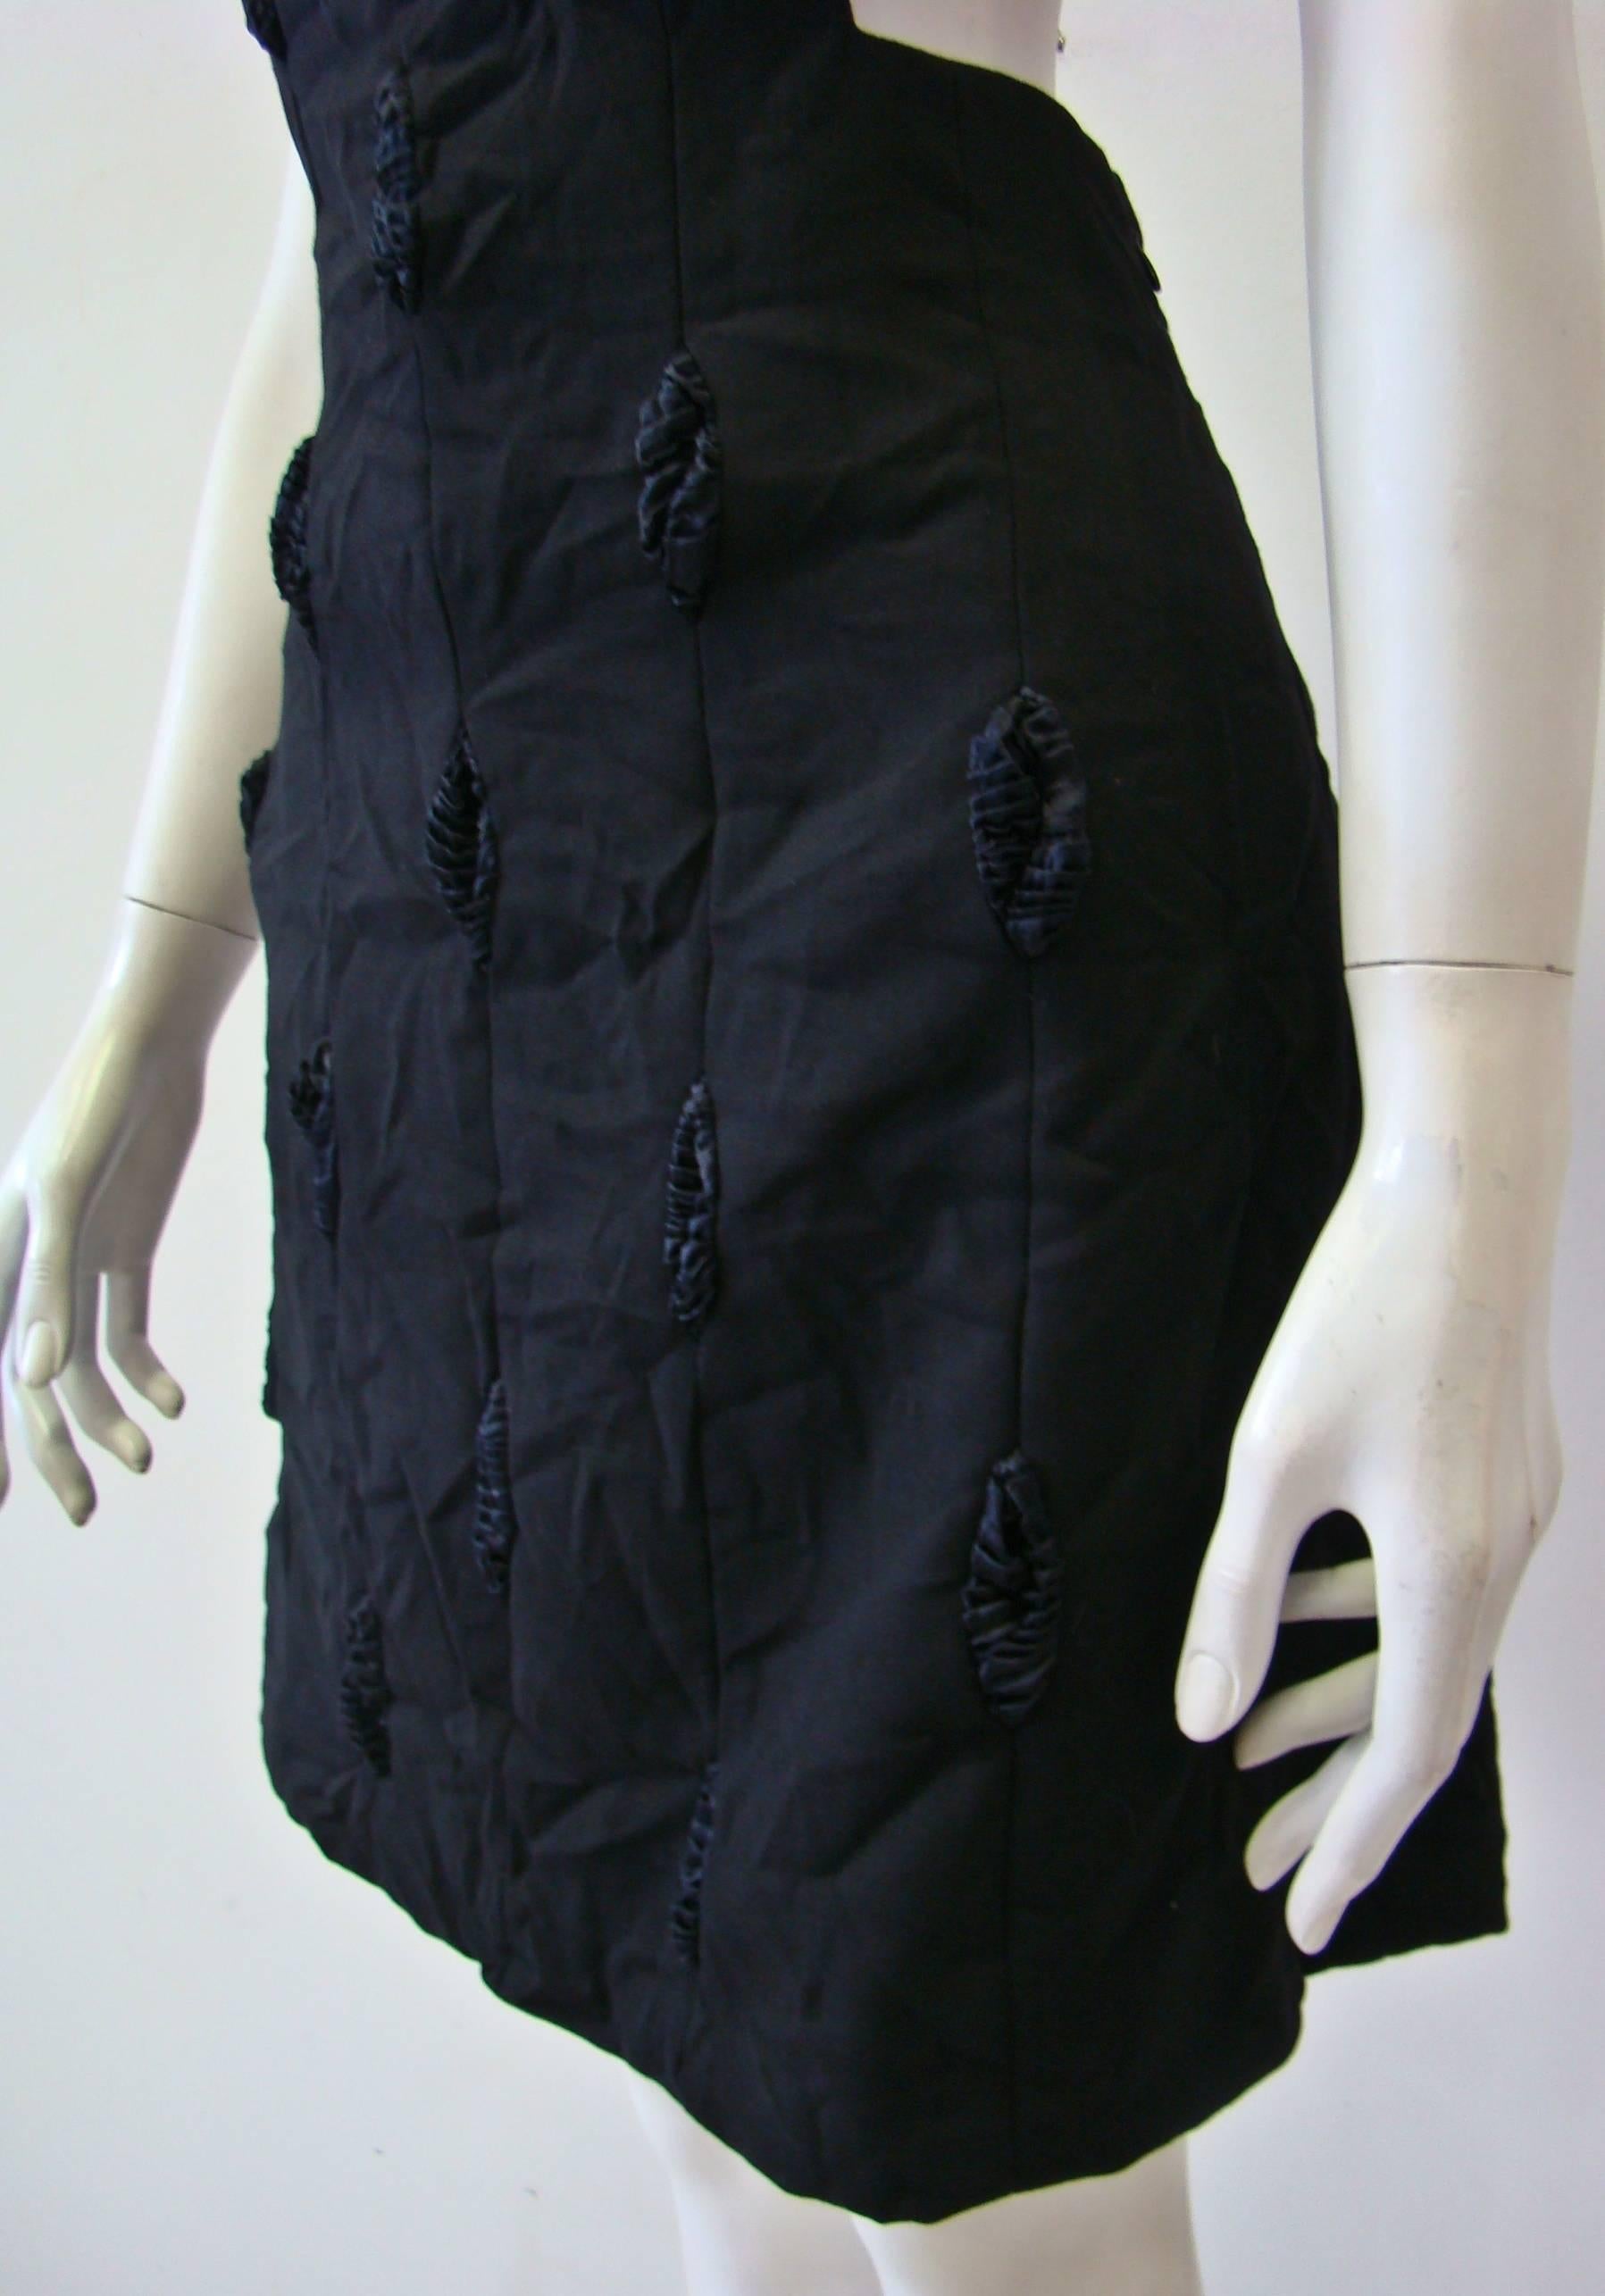 Atelier Versace Punk Evening Pinafore Romber And Jacket Spring 1994 For Sale 4